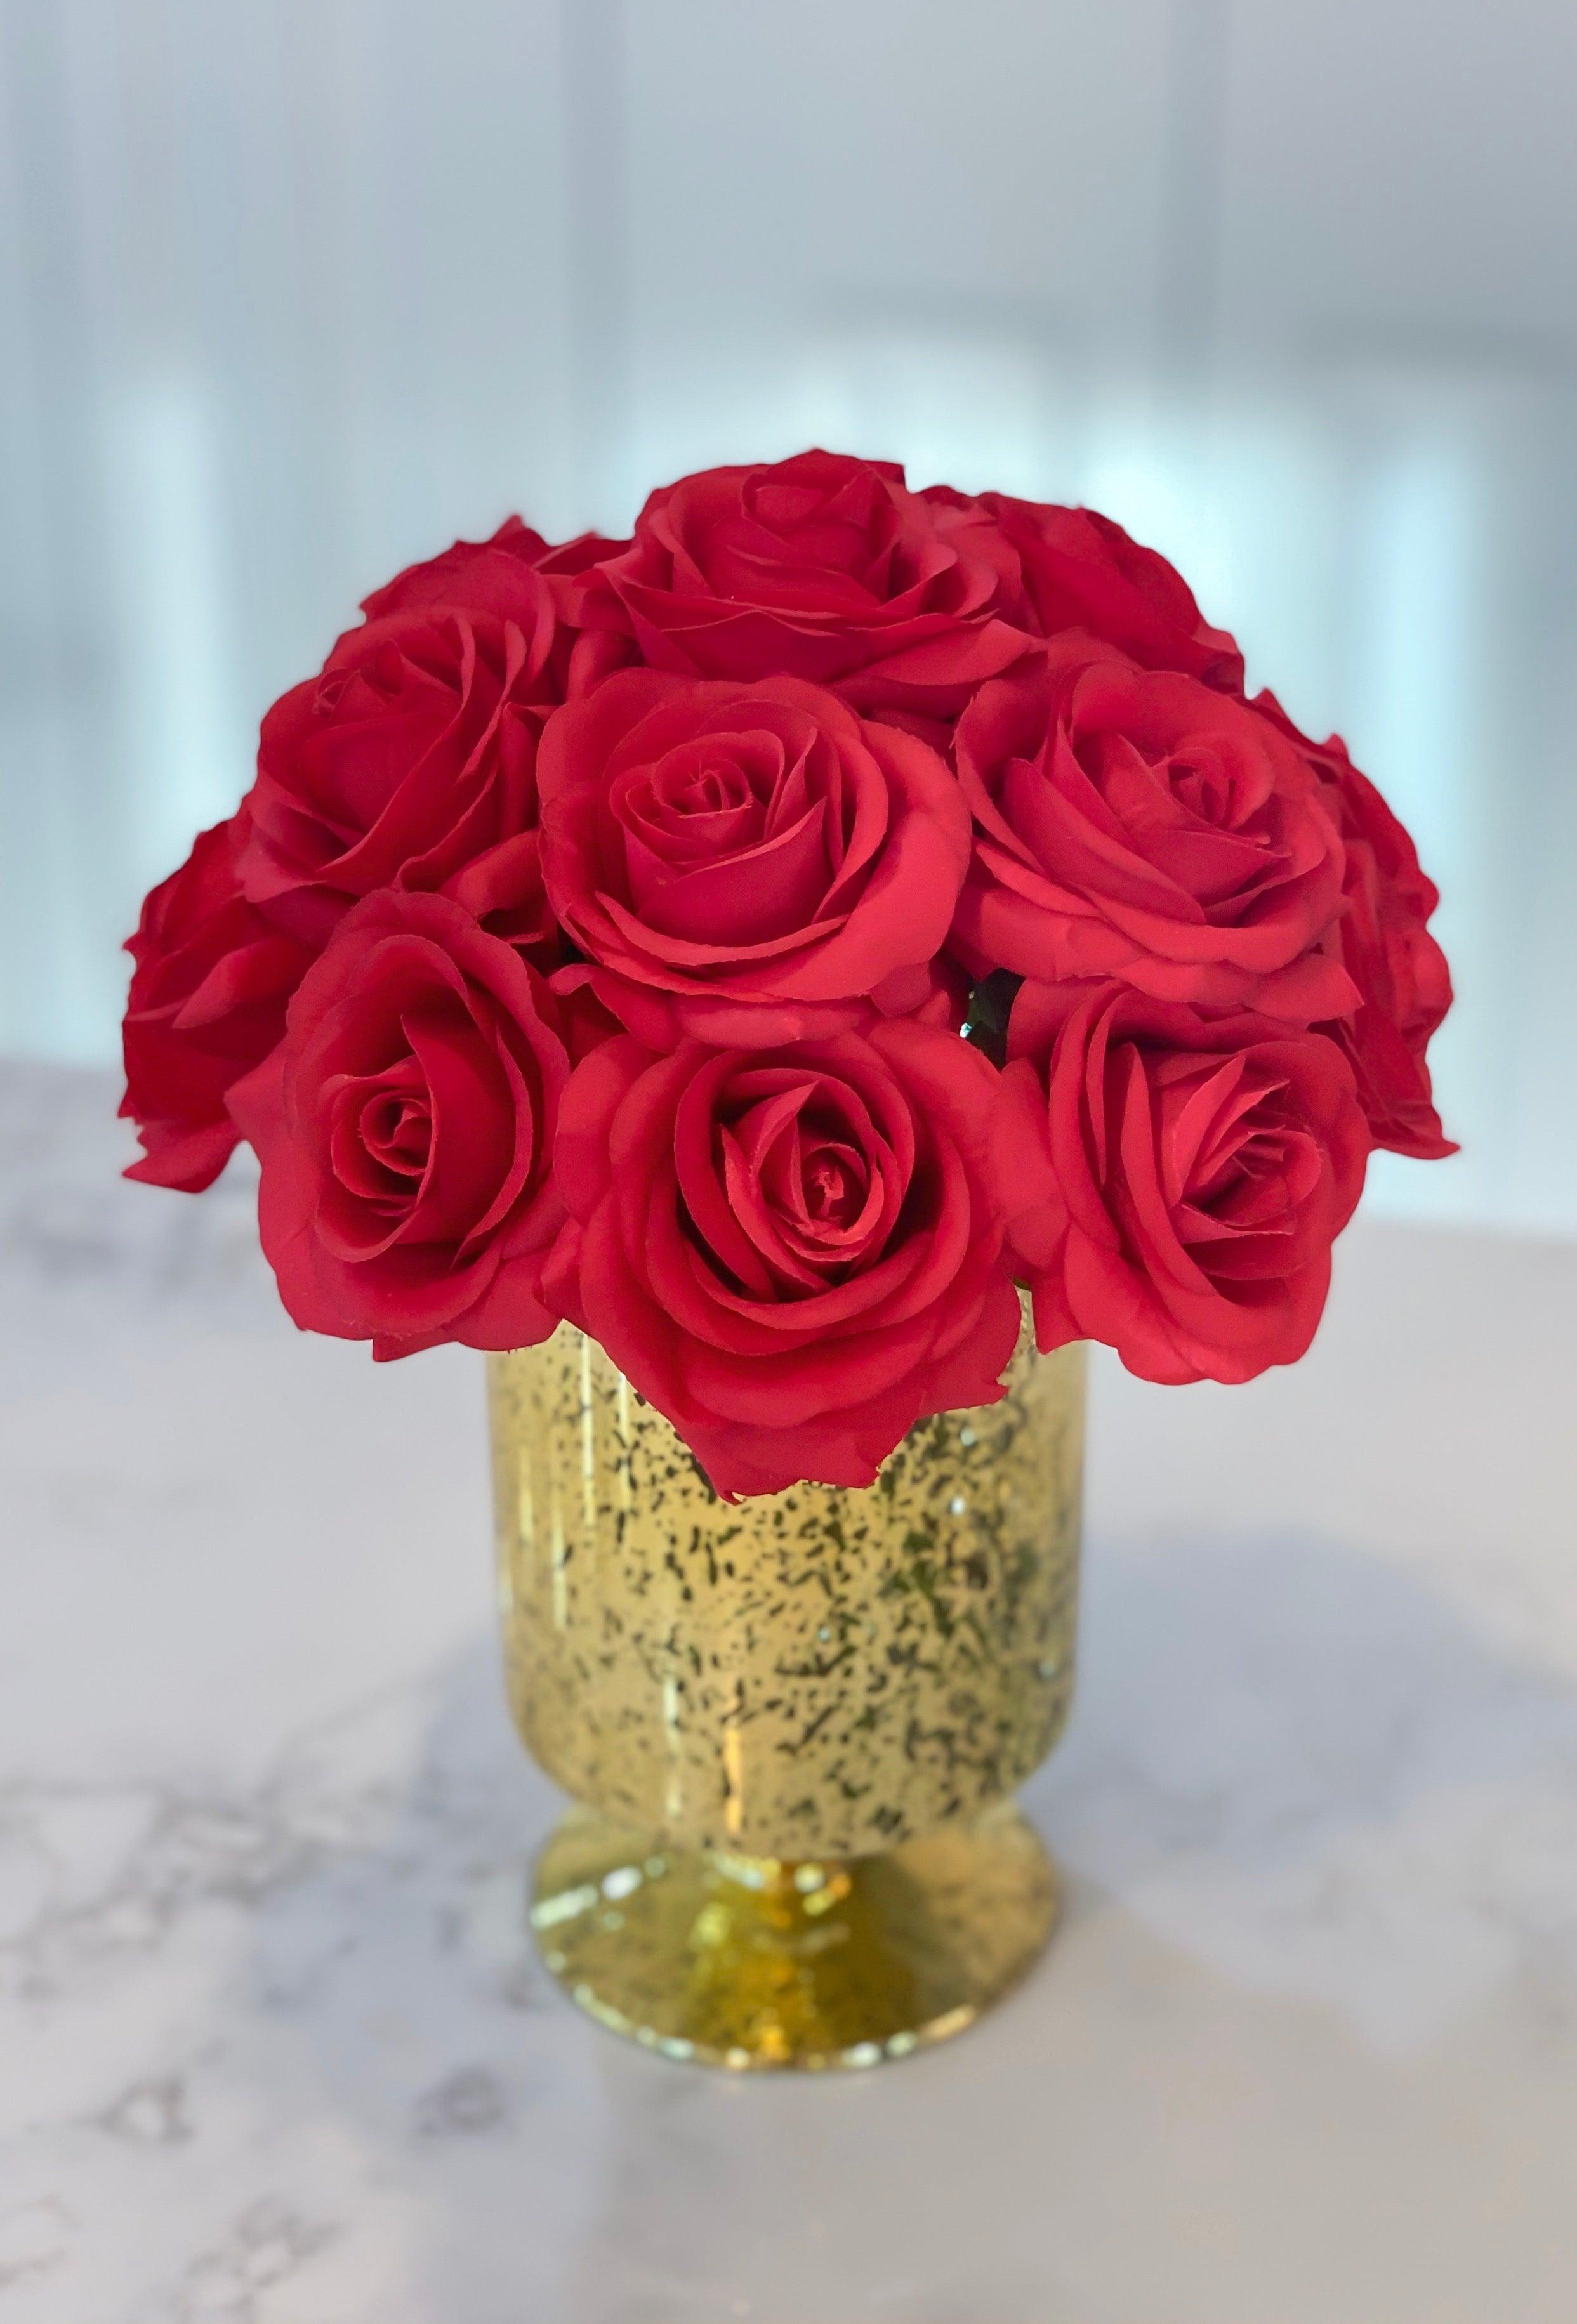 Real Touch Red Rose Arrangement In Gold Vase - Home Decor - Centerpiece - Flovery